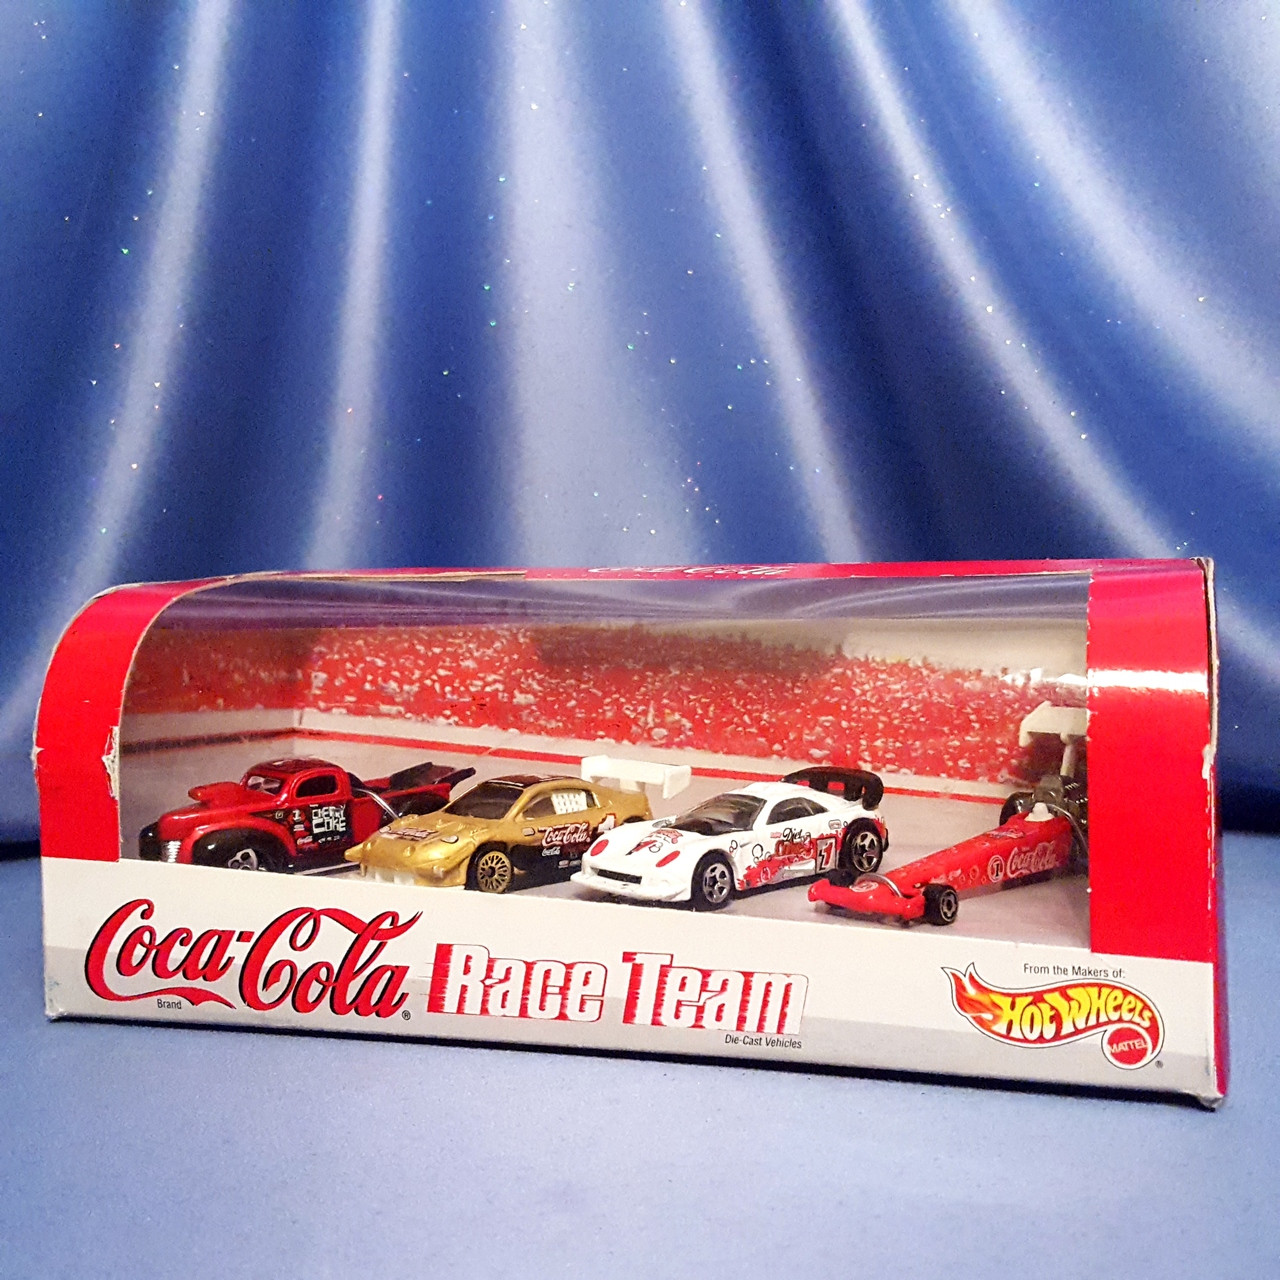 Coca-Cola Race Team 4 Piece Car Collection by Hot Wheels. - Now